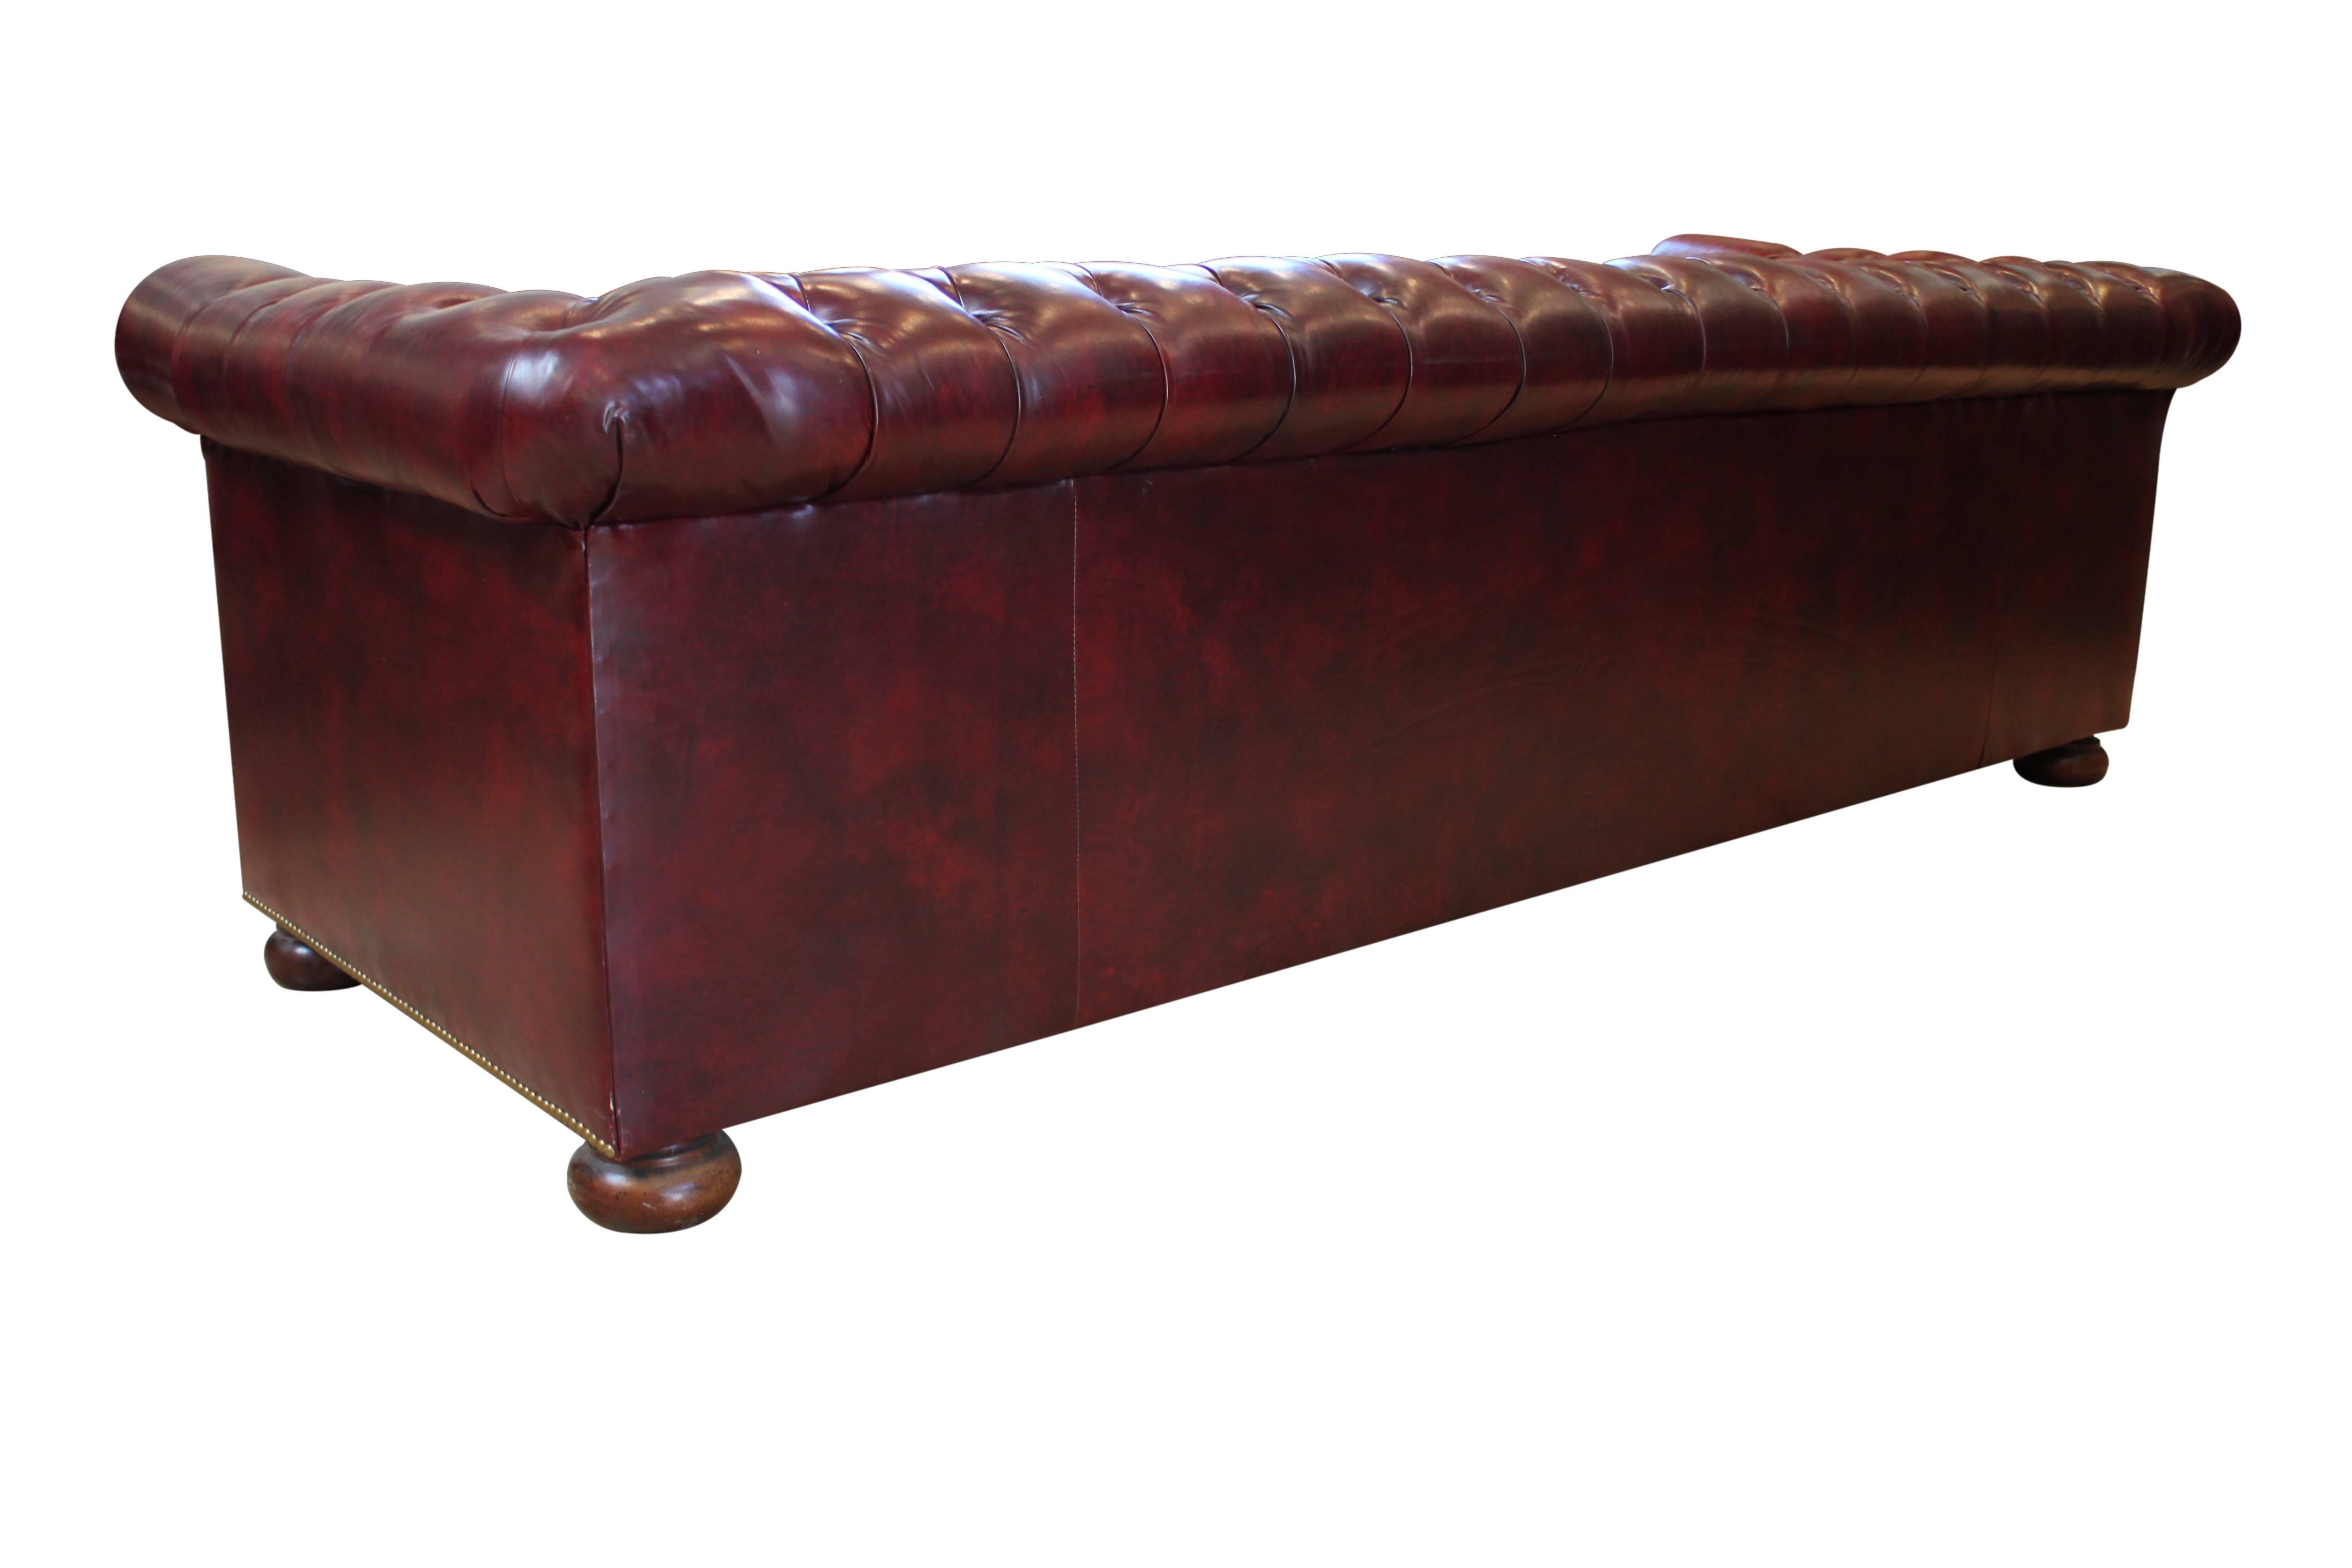 Vintage Tufted Leather 8' Chesterfield Sofa 2